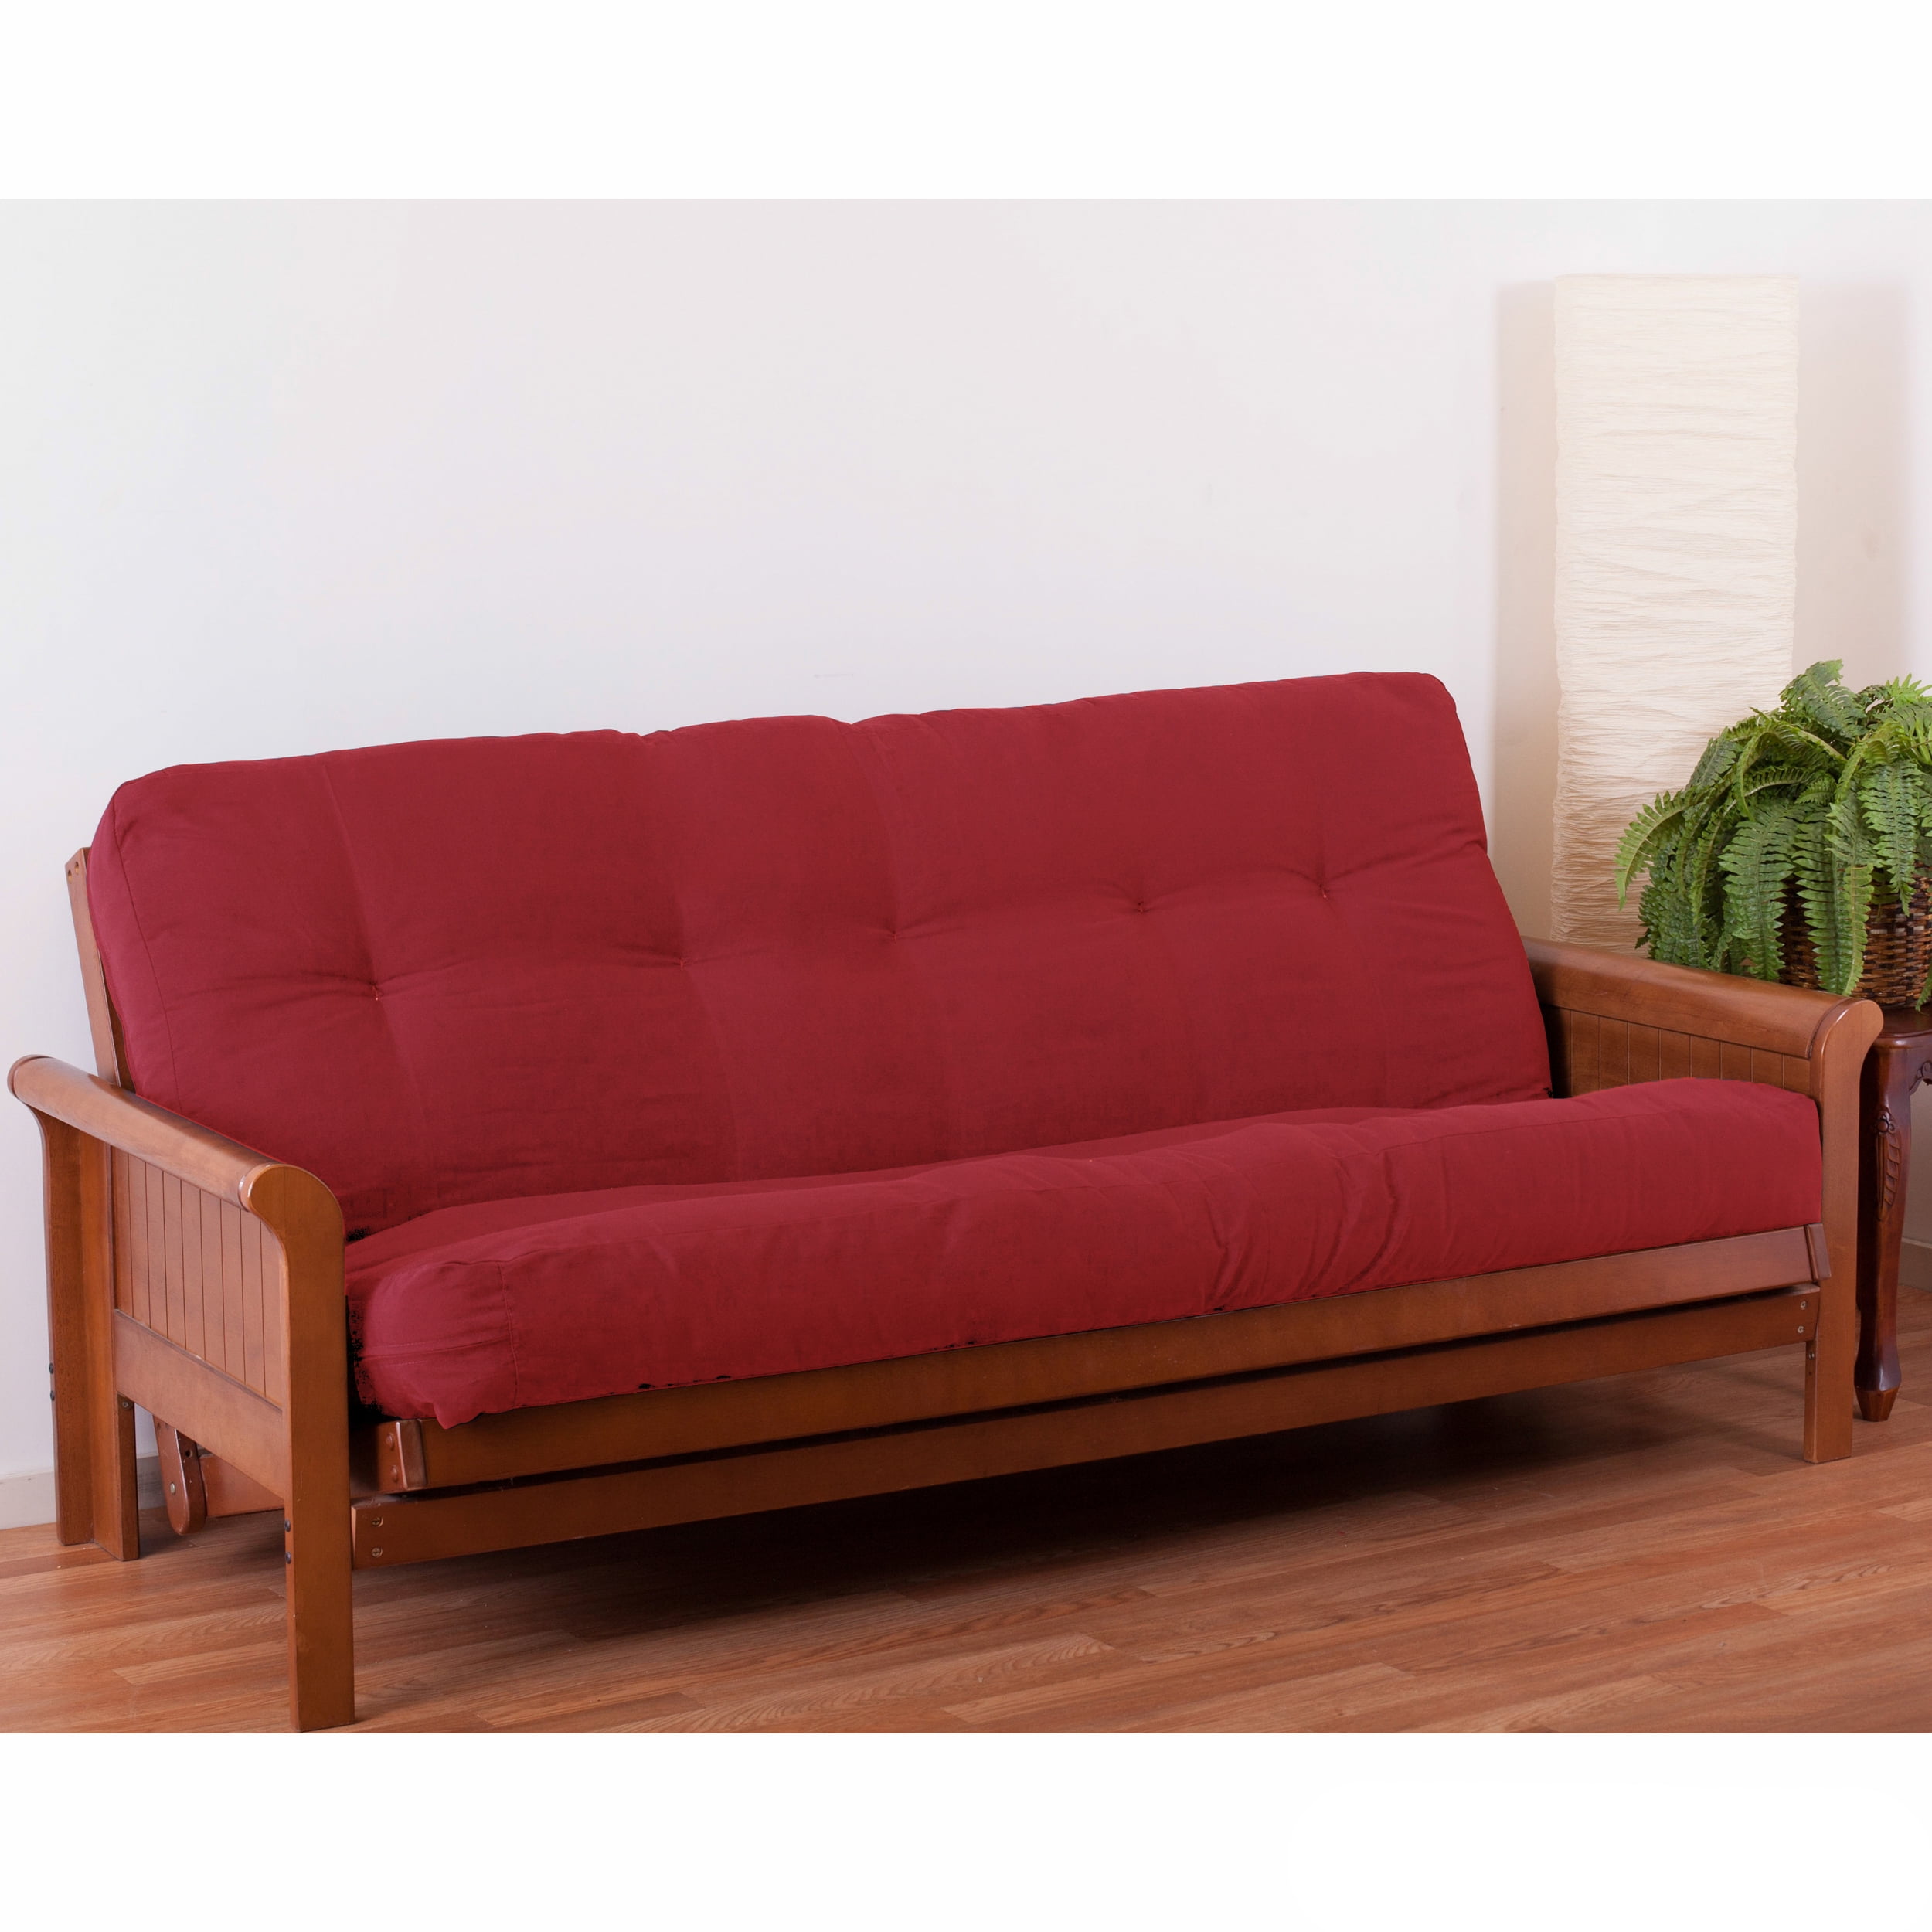 Picture of Blazing Needles 9606-B-TW-RR 7 in. Renewal Twill Full Size Futon Mattress, Ruby Red